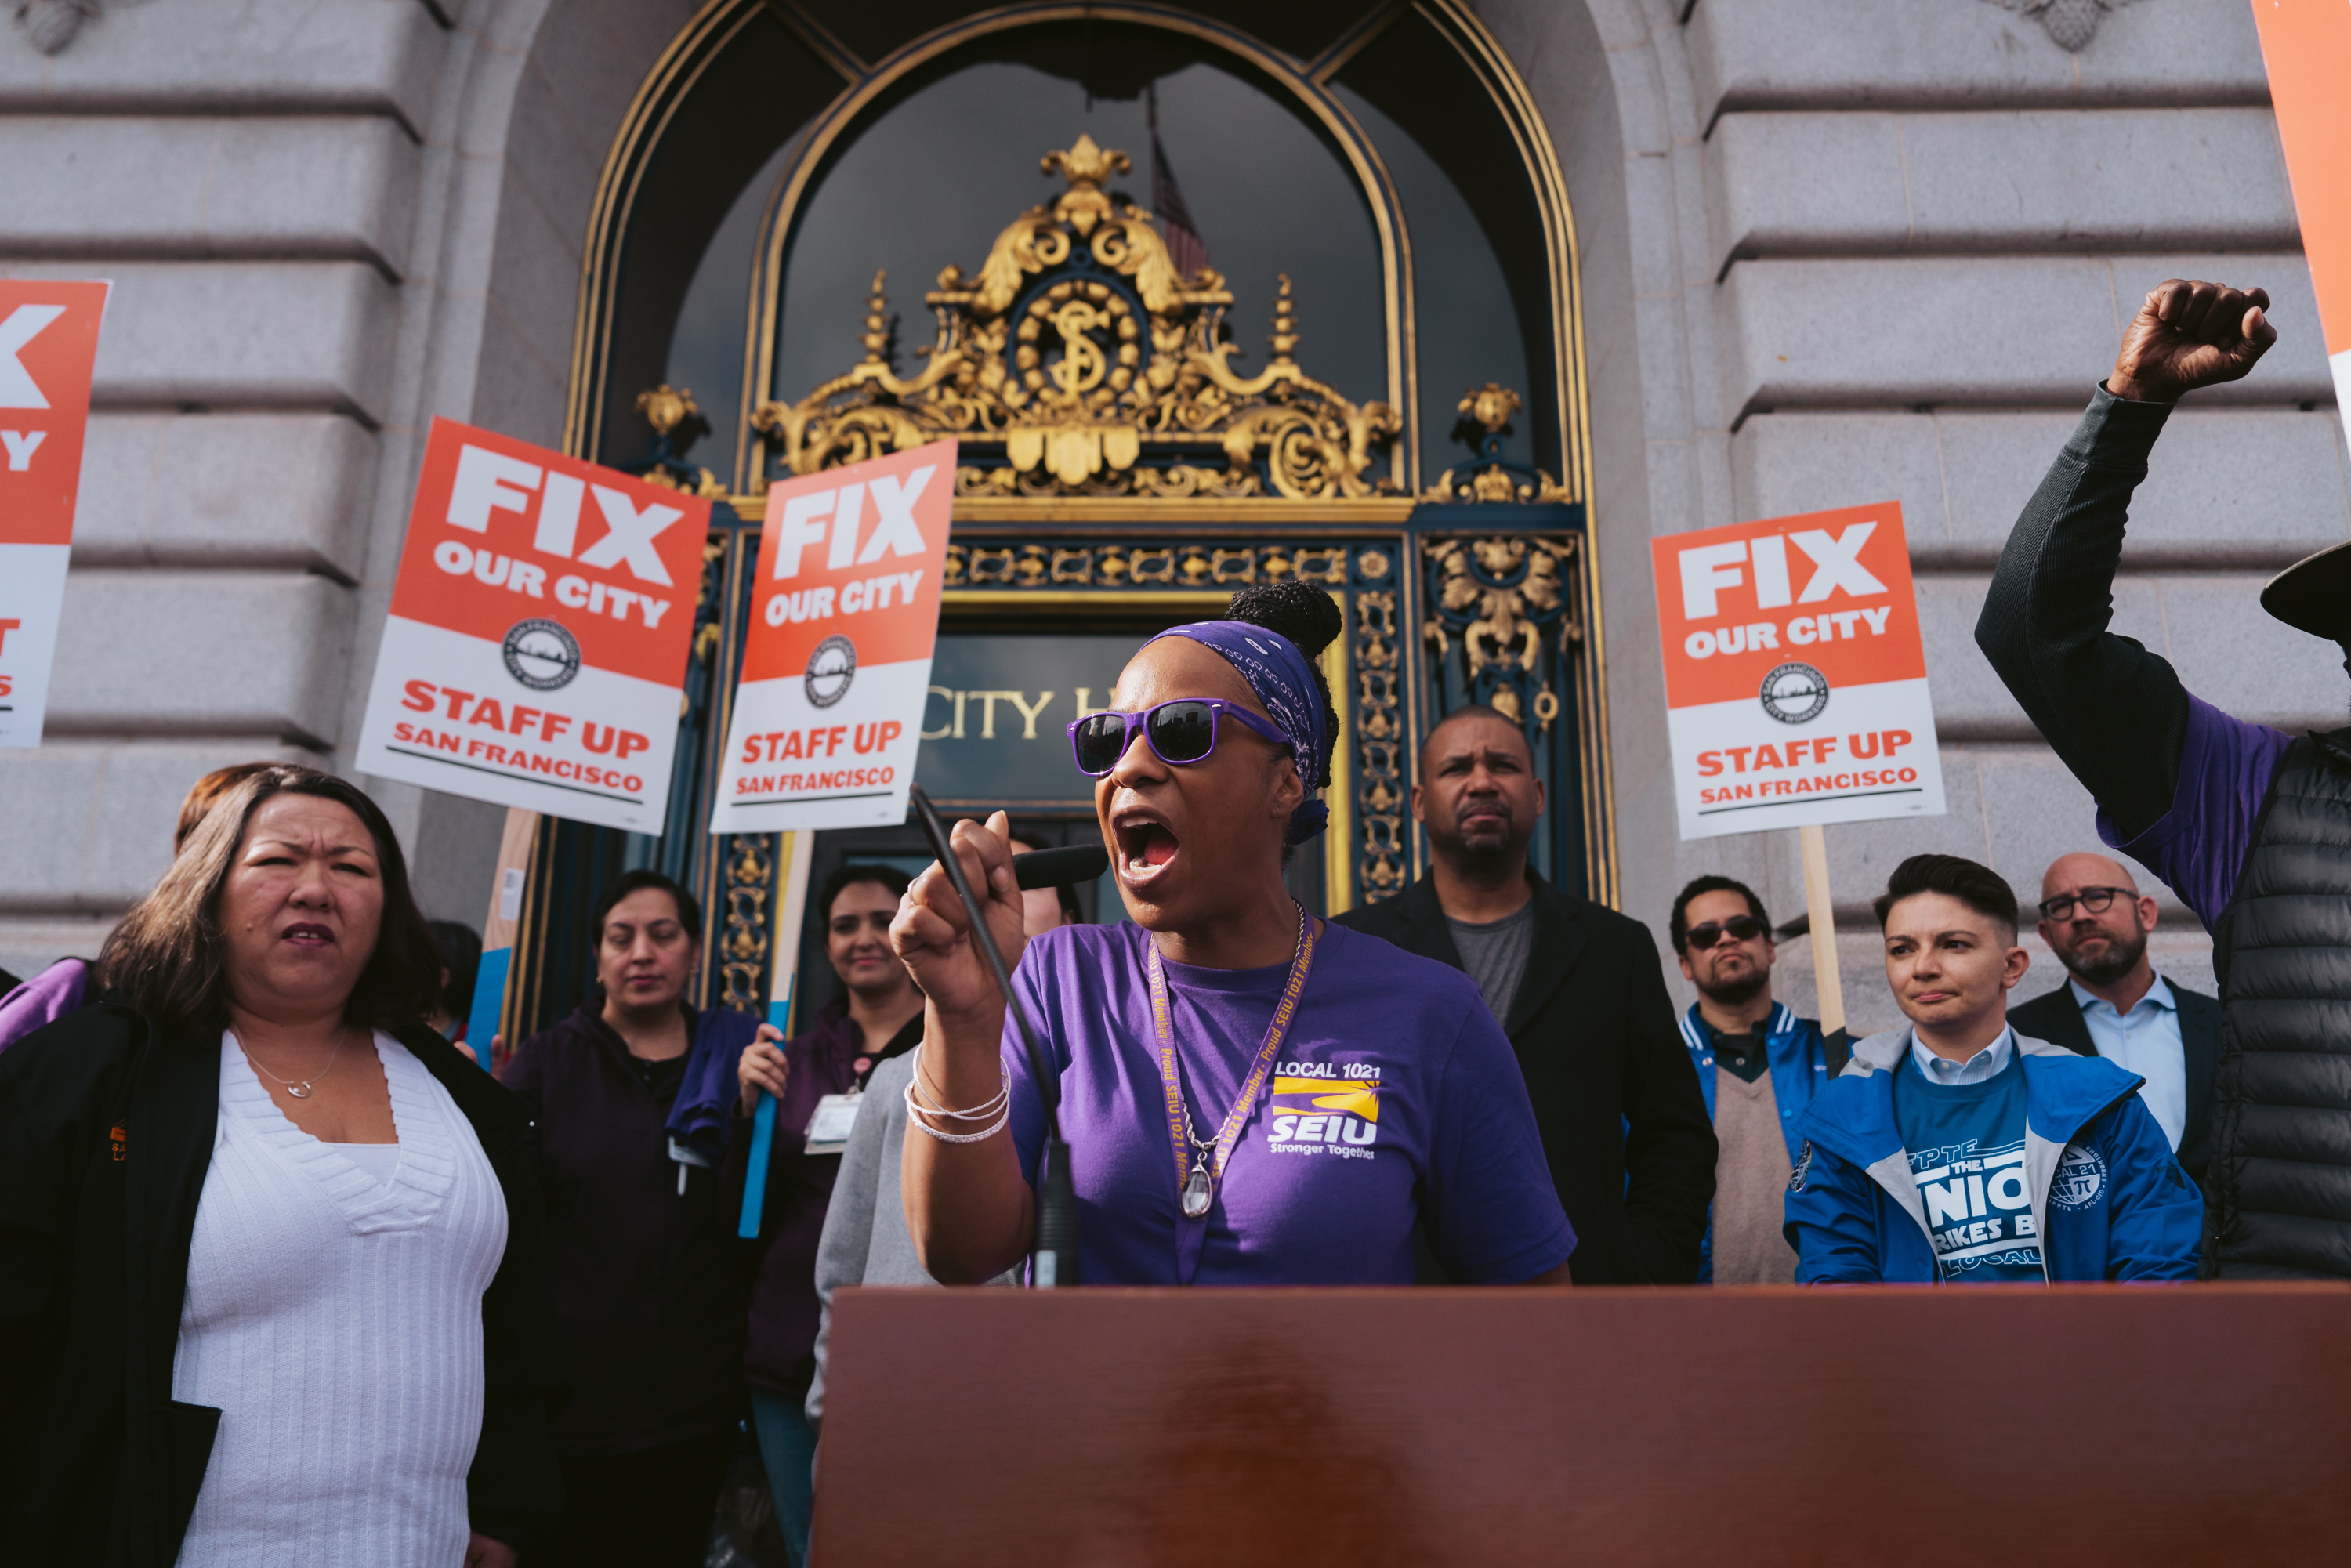 A group protests with signs reading &quot;FIX OUR CITY,&quot; a woman in purple speaks passionately into a microphone.